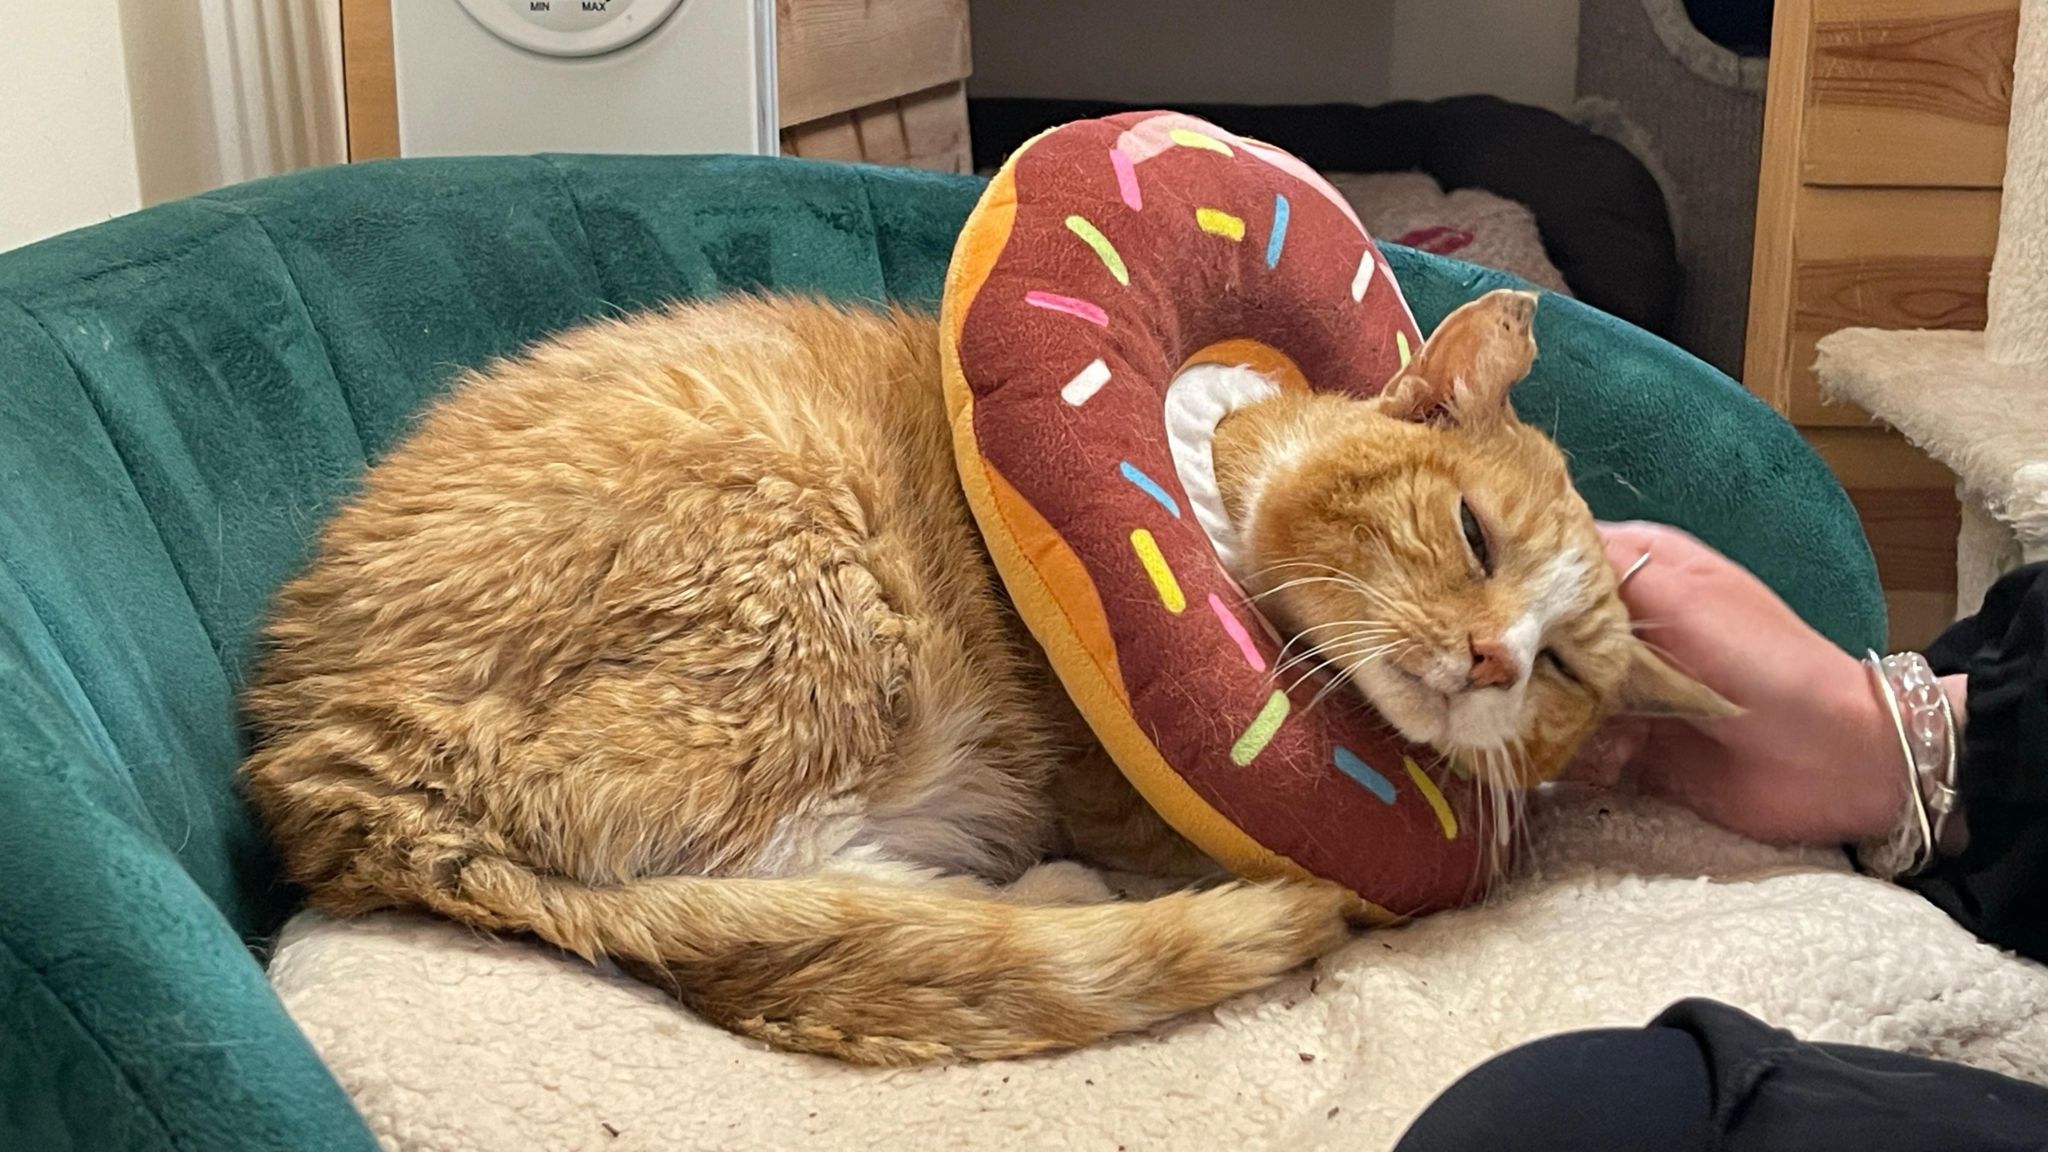 Murphy the elderly ginger cat has his head scratched. He is wearing a plush doughnut neck brace